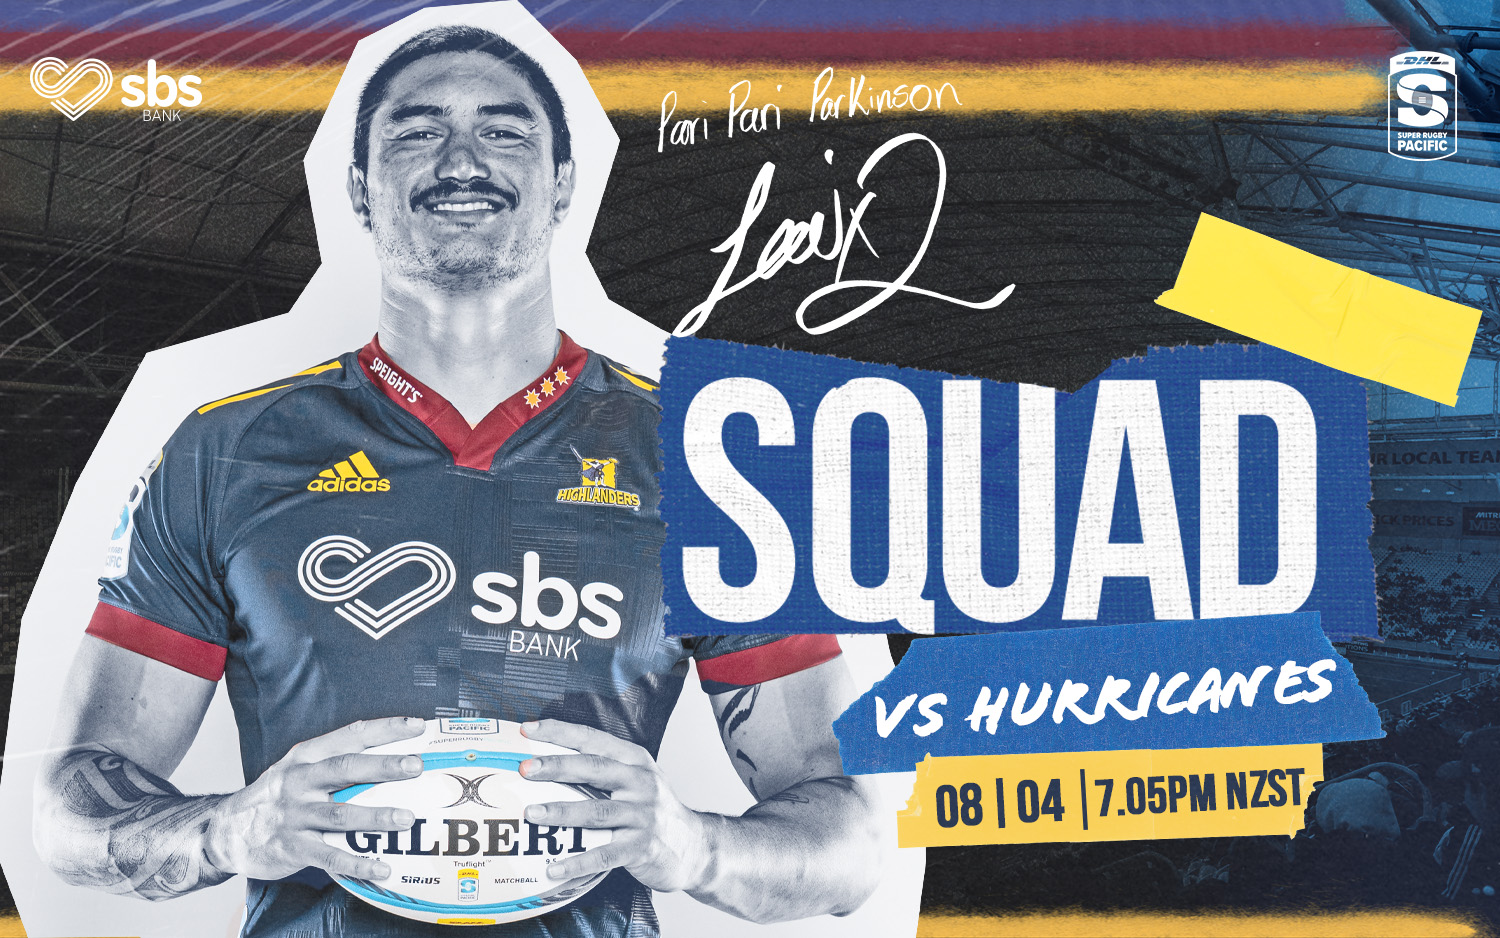 Highlanders to play Hurricanes on Easter Saturday | Highlanders Rugby Club Limited Partnership